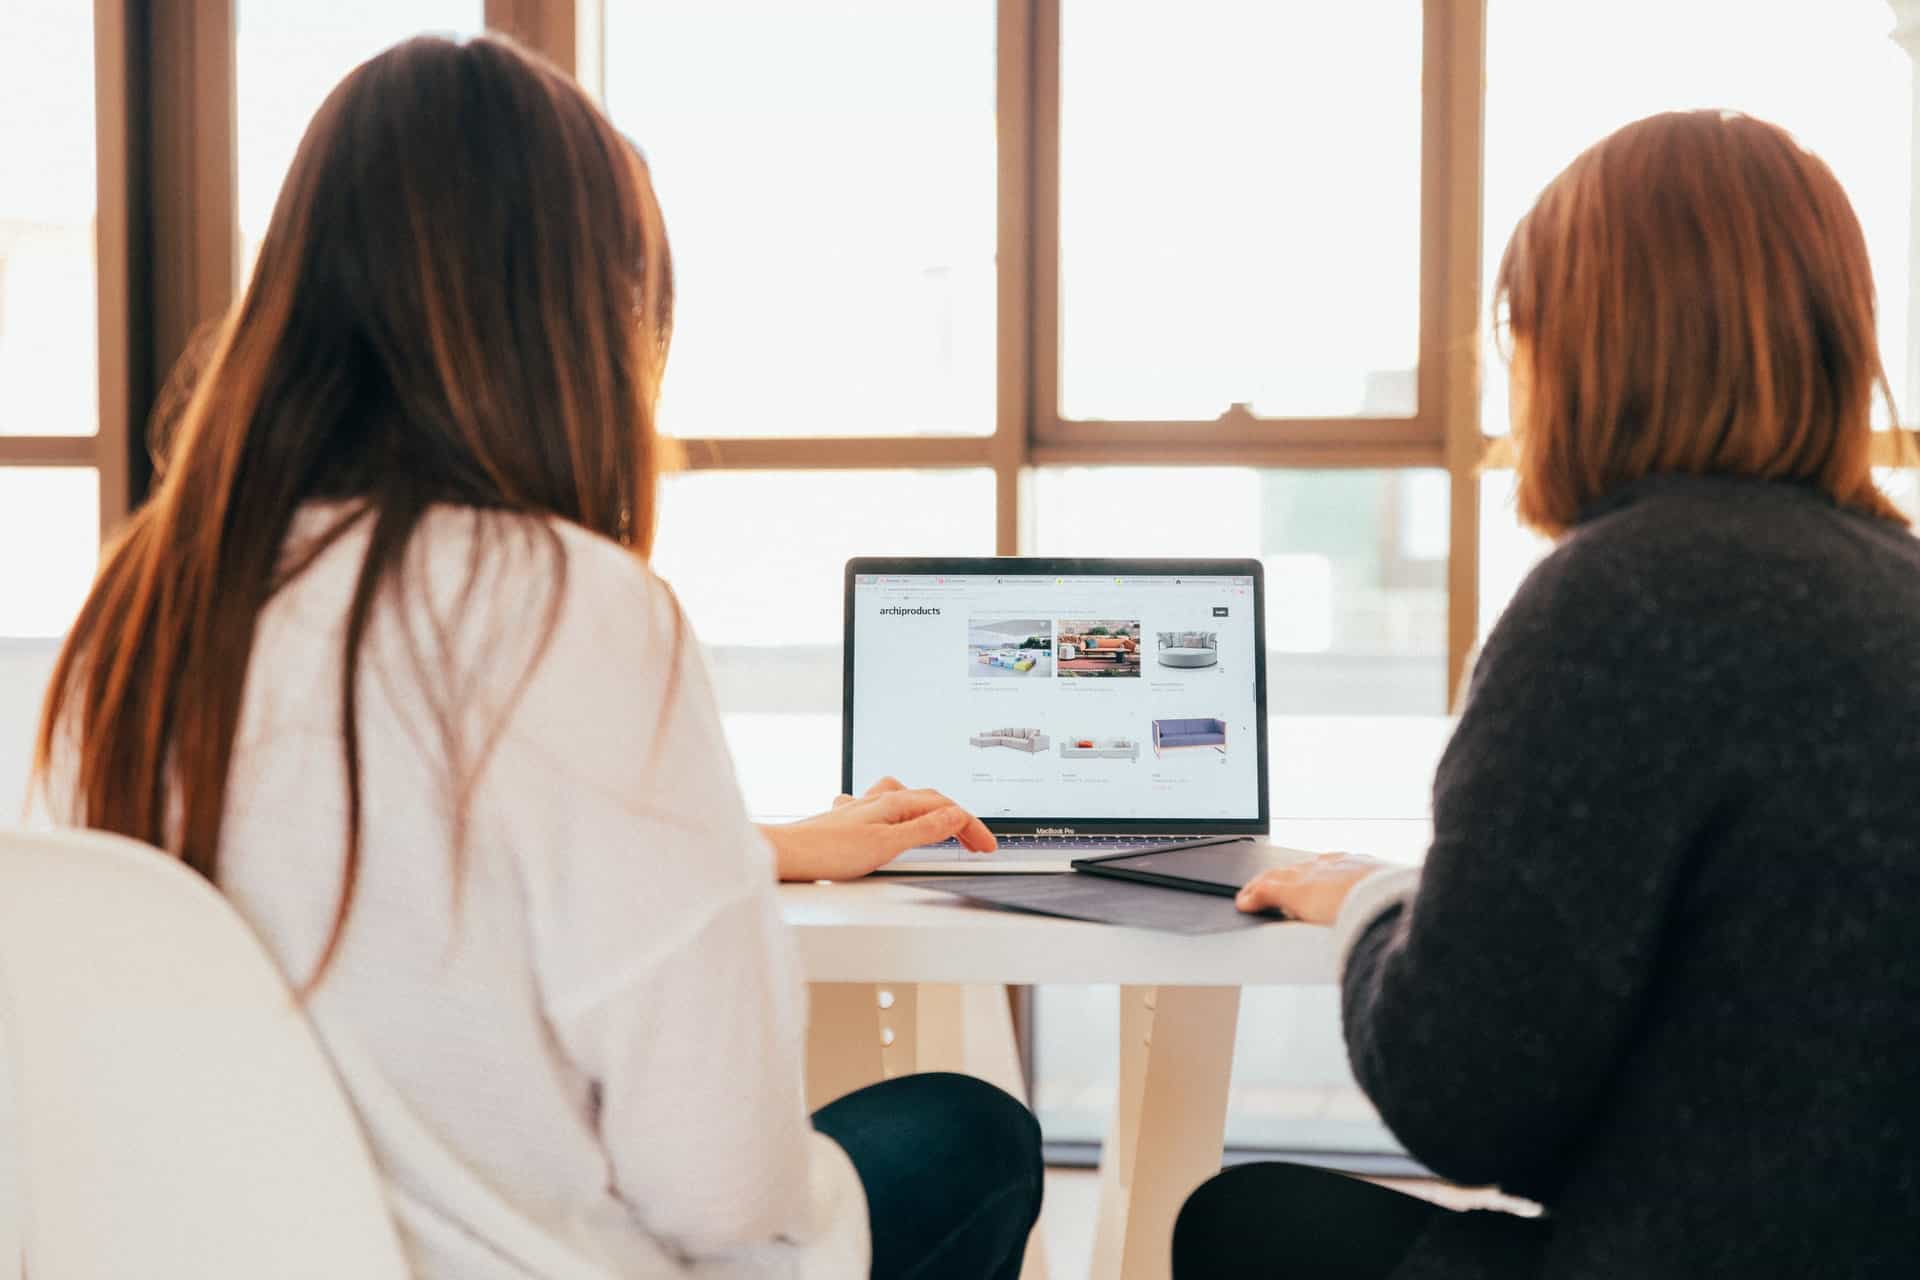 Women looking at website together